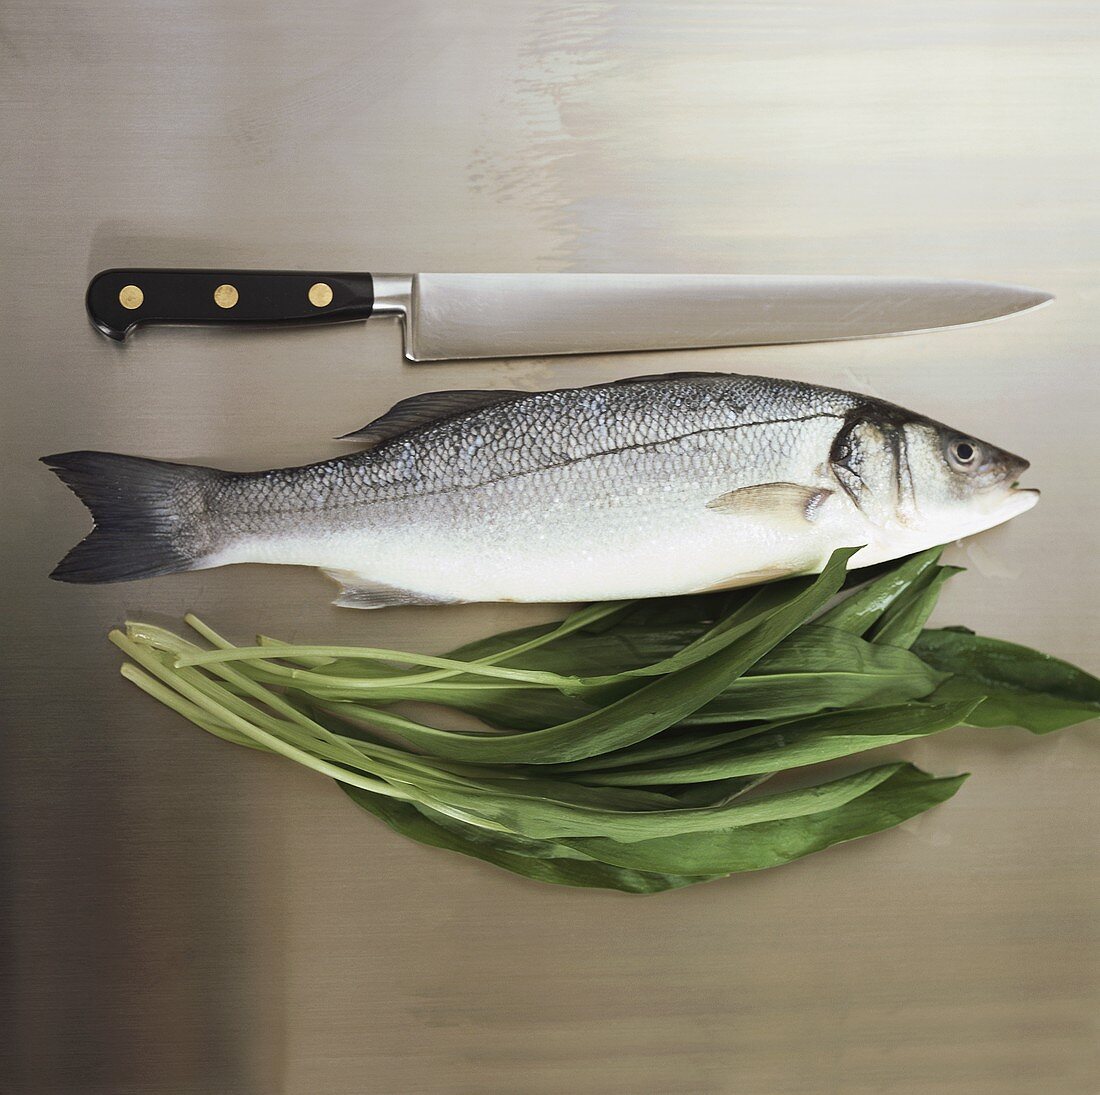 Sea bass with ramsons (wild garlic) and knife